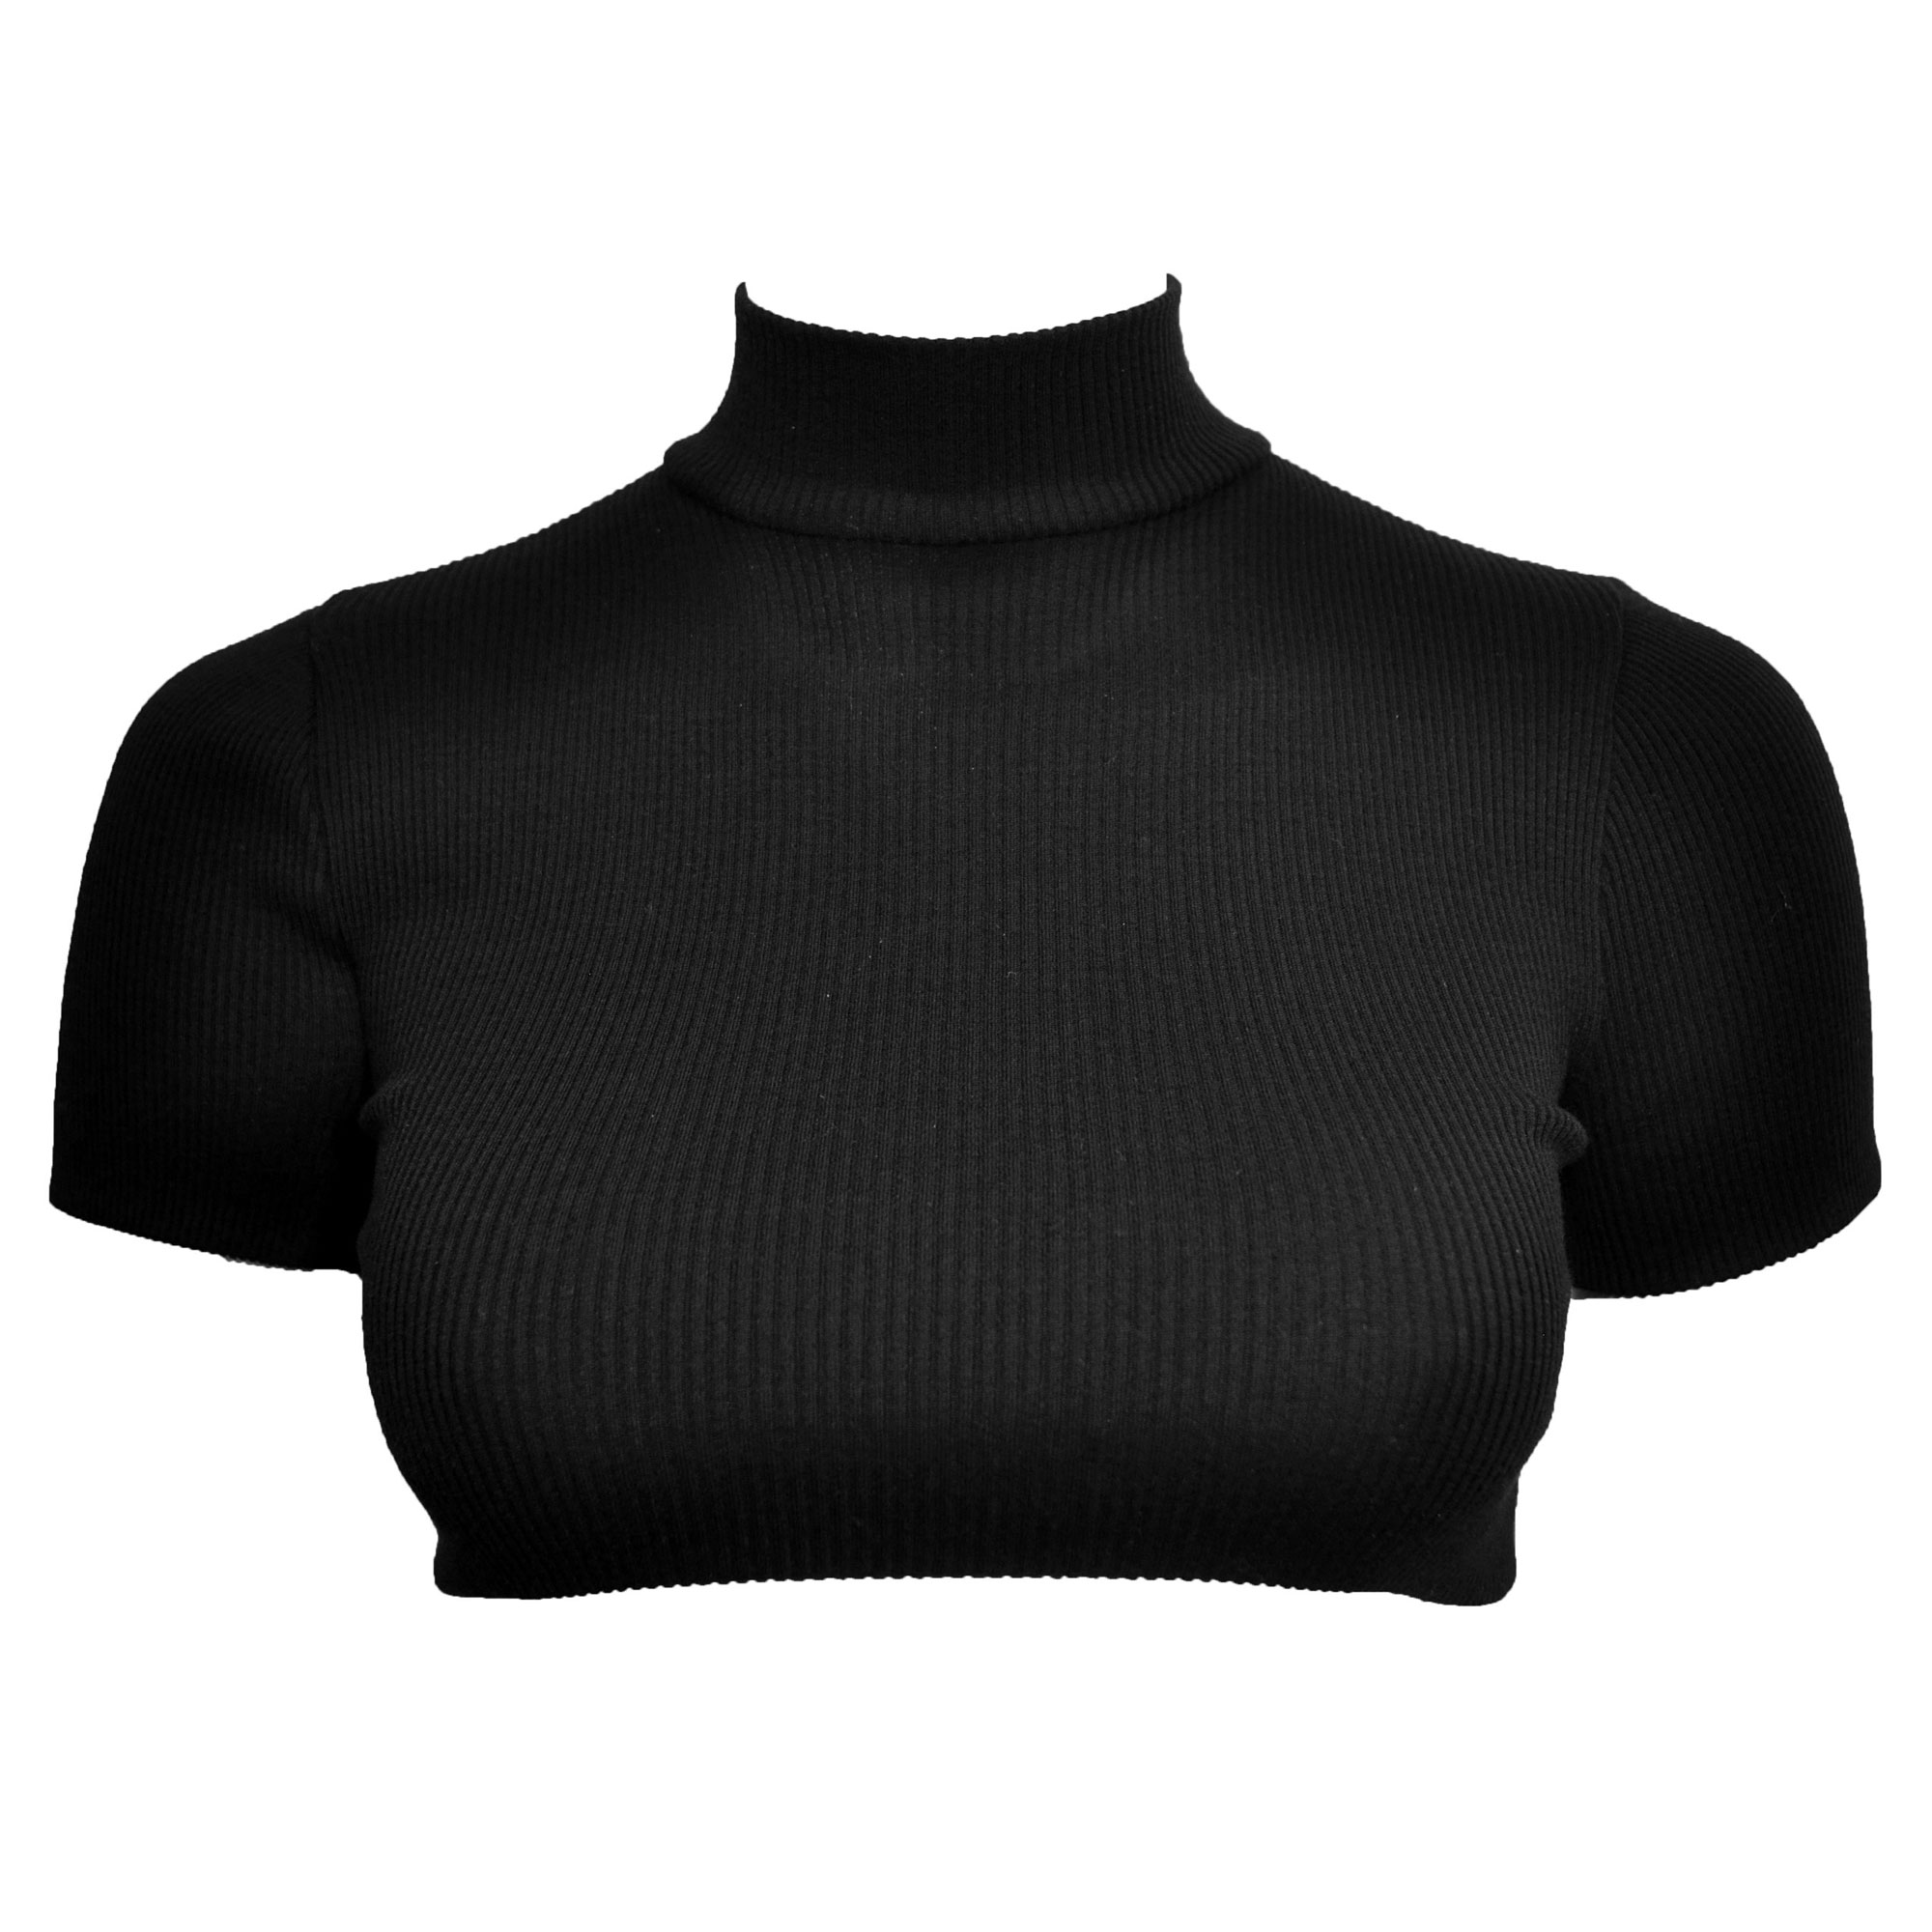 Chiron ribbed seamless crop top by DSTM